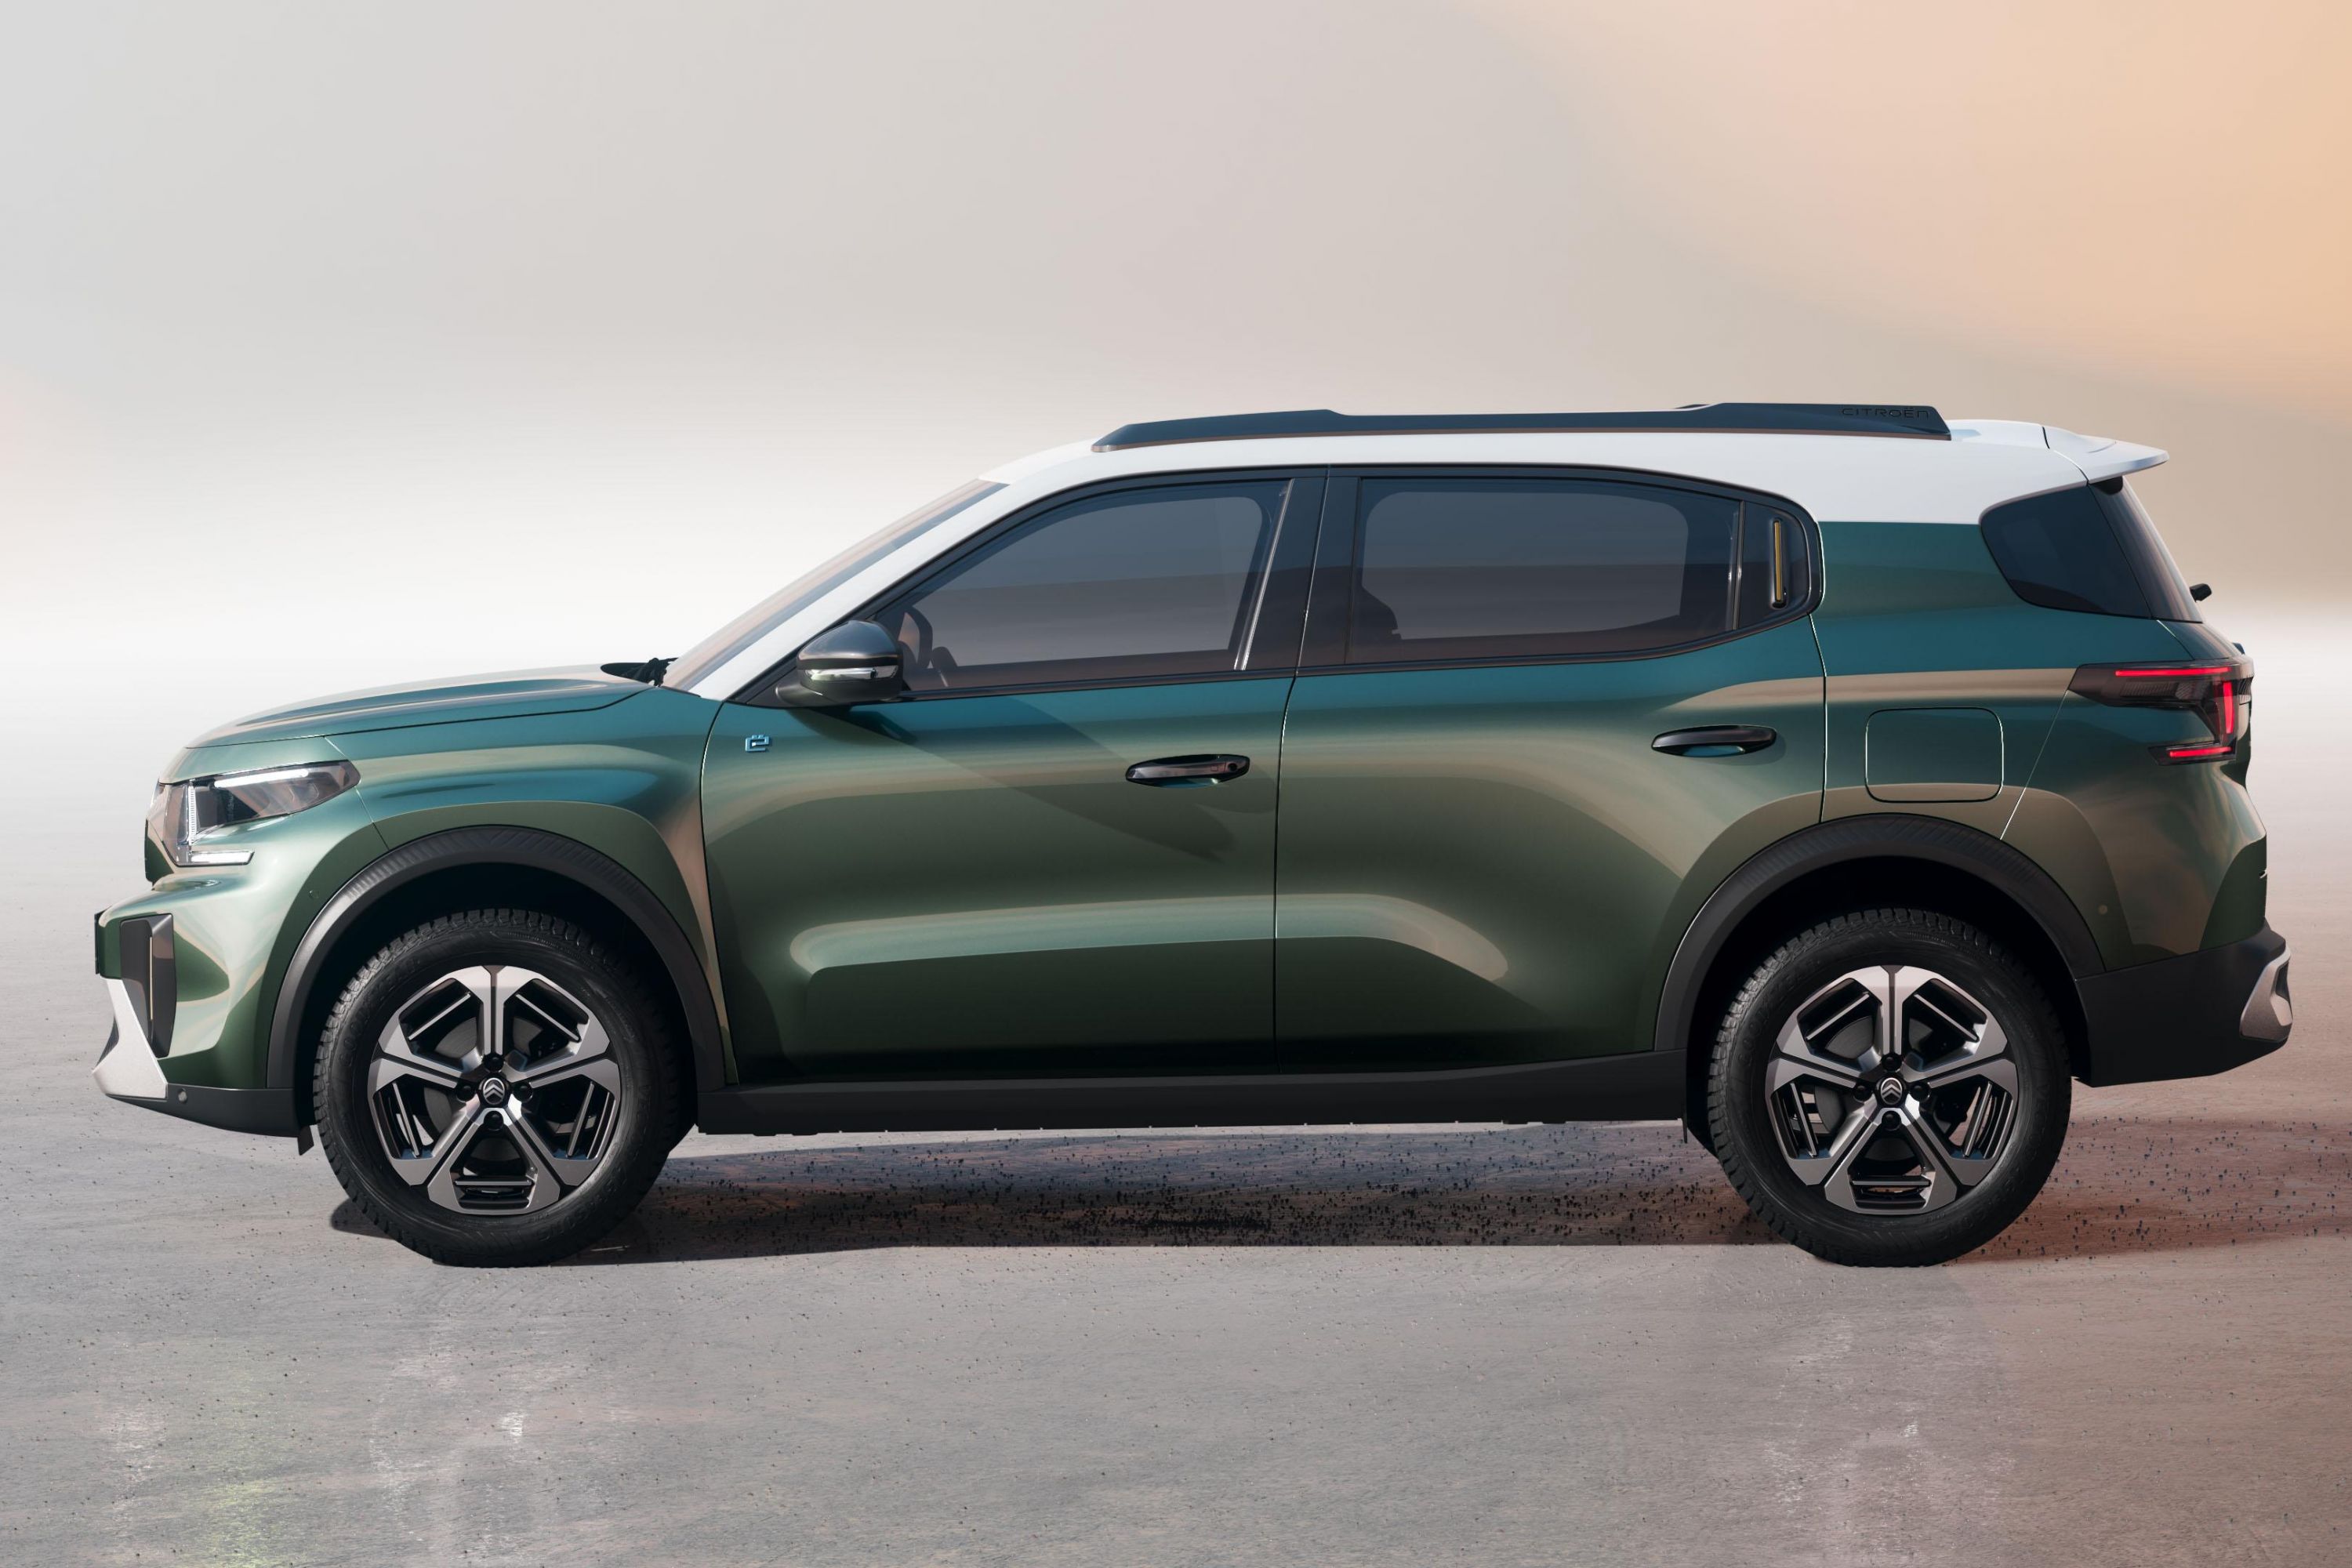 2025 citroen c3 aircross unveiled with squarer styling, seven seats